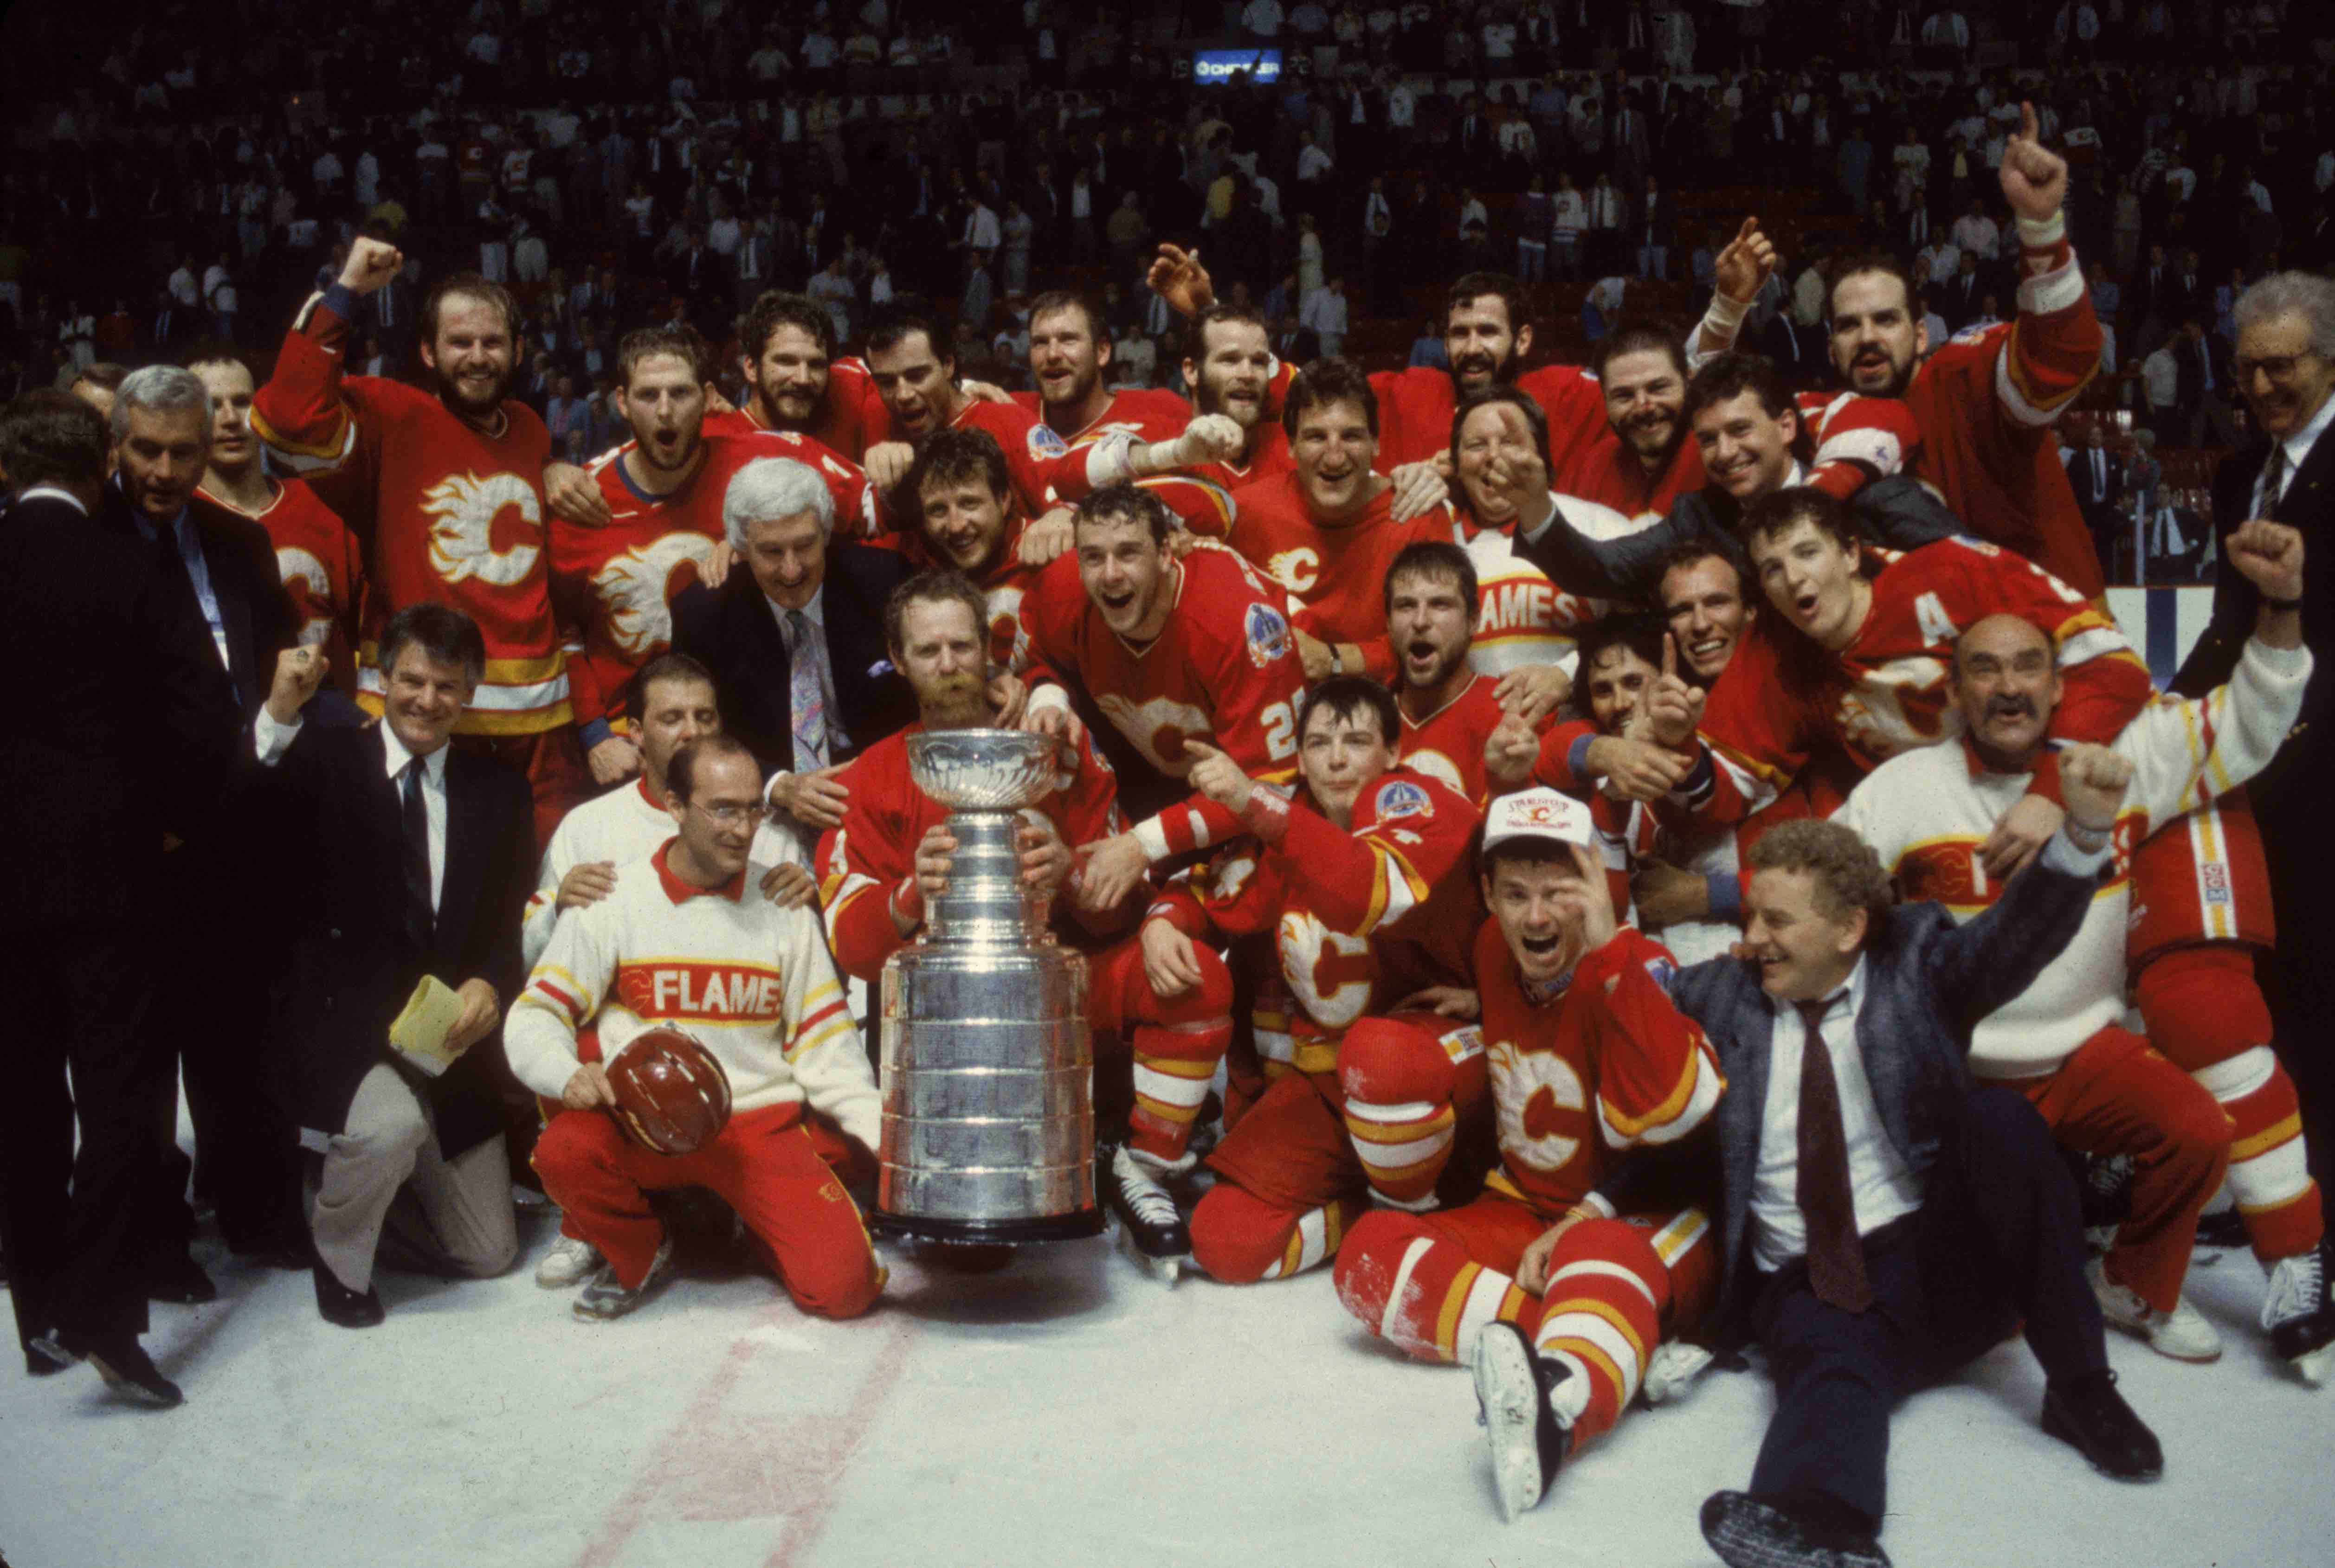 Calgary Flames, Stanley Cup Champions